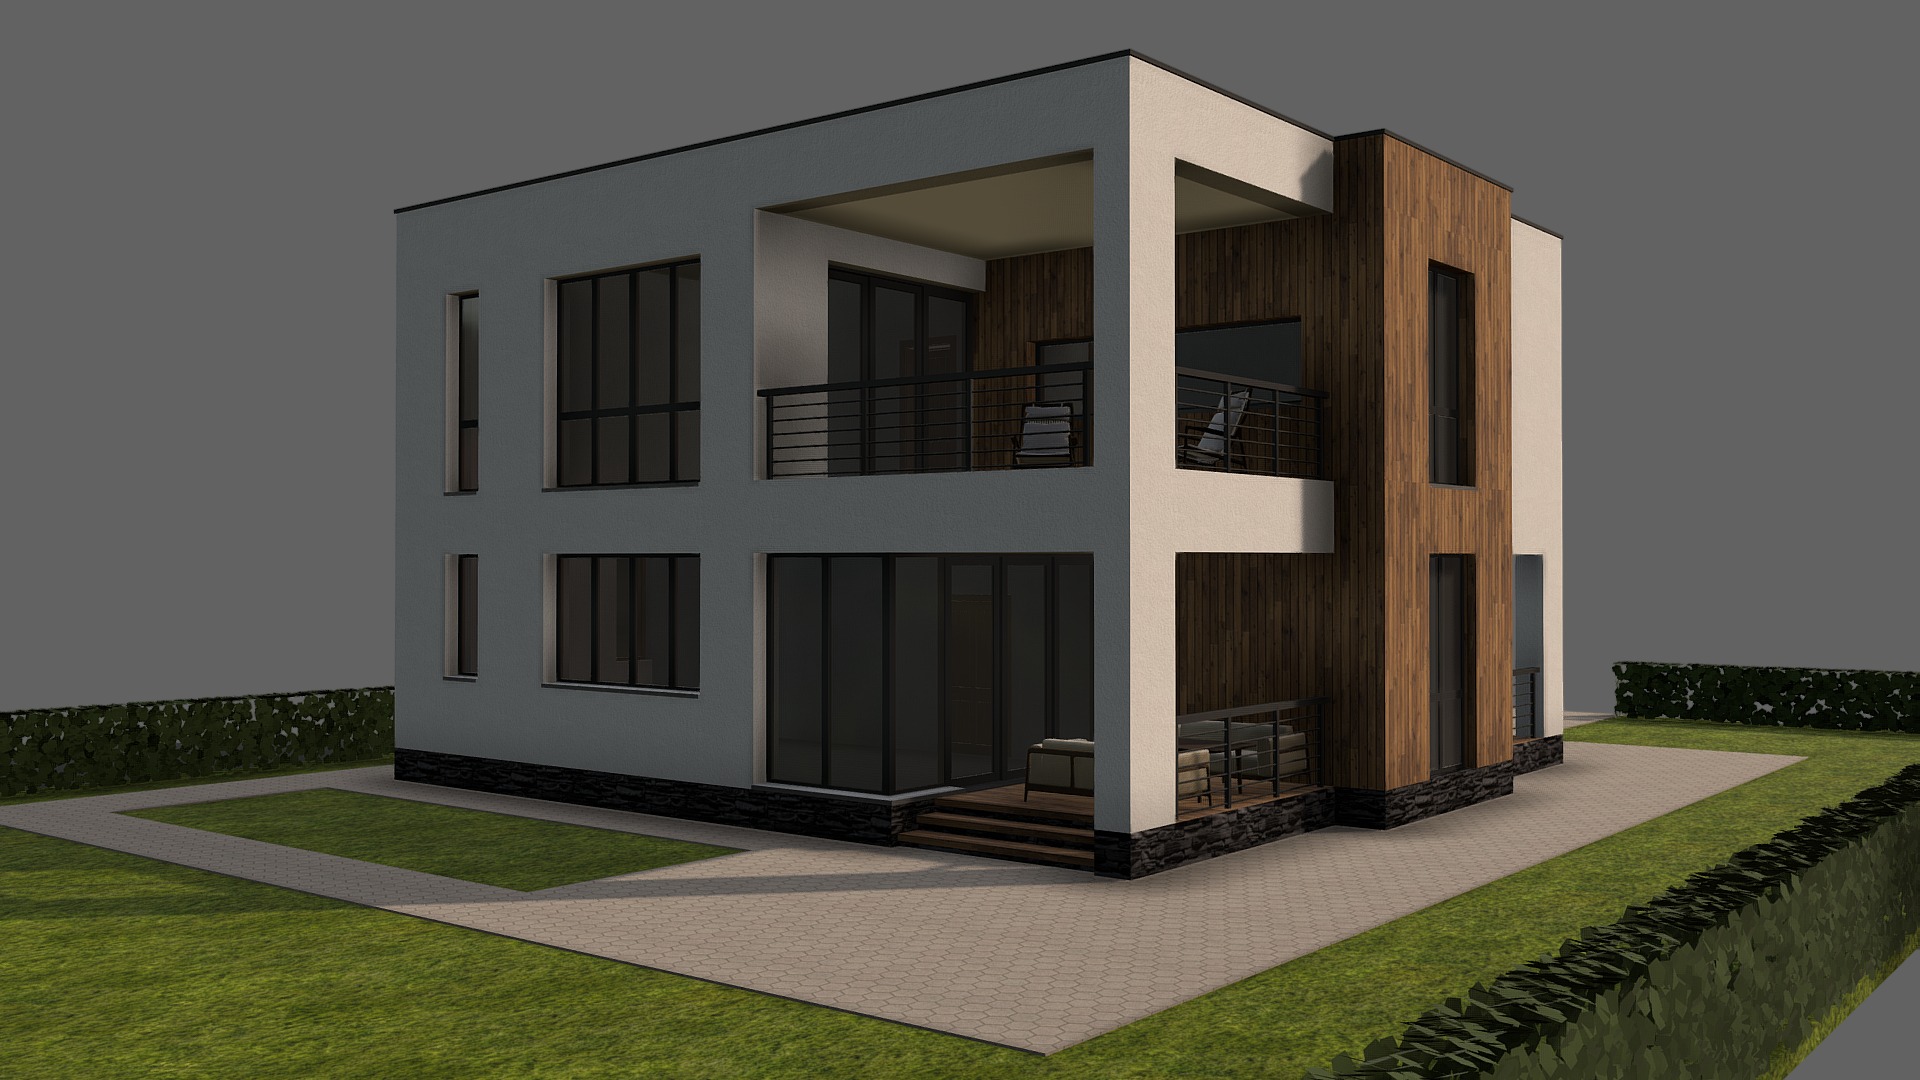 3D model Проект дома_ 3.0 - This is a 3D model of the Проект дома_ 3.0. The 3D model is about a house with a pool.